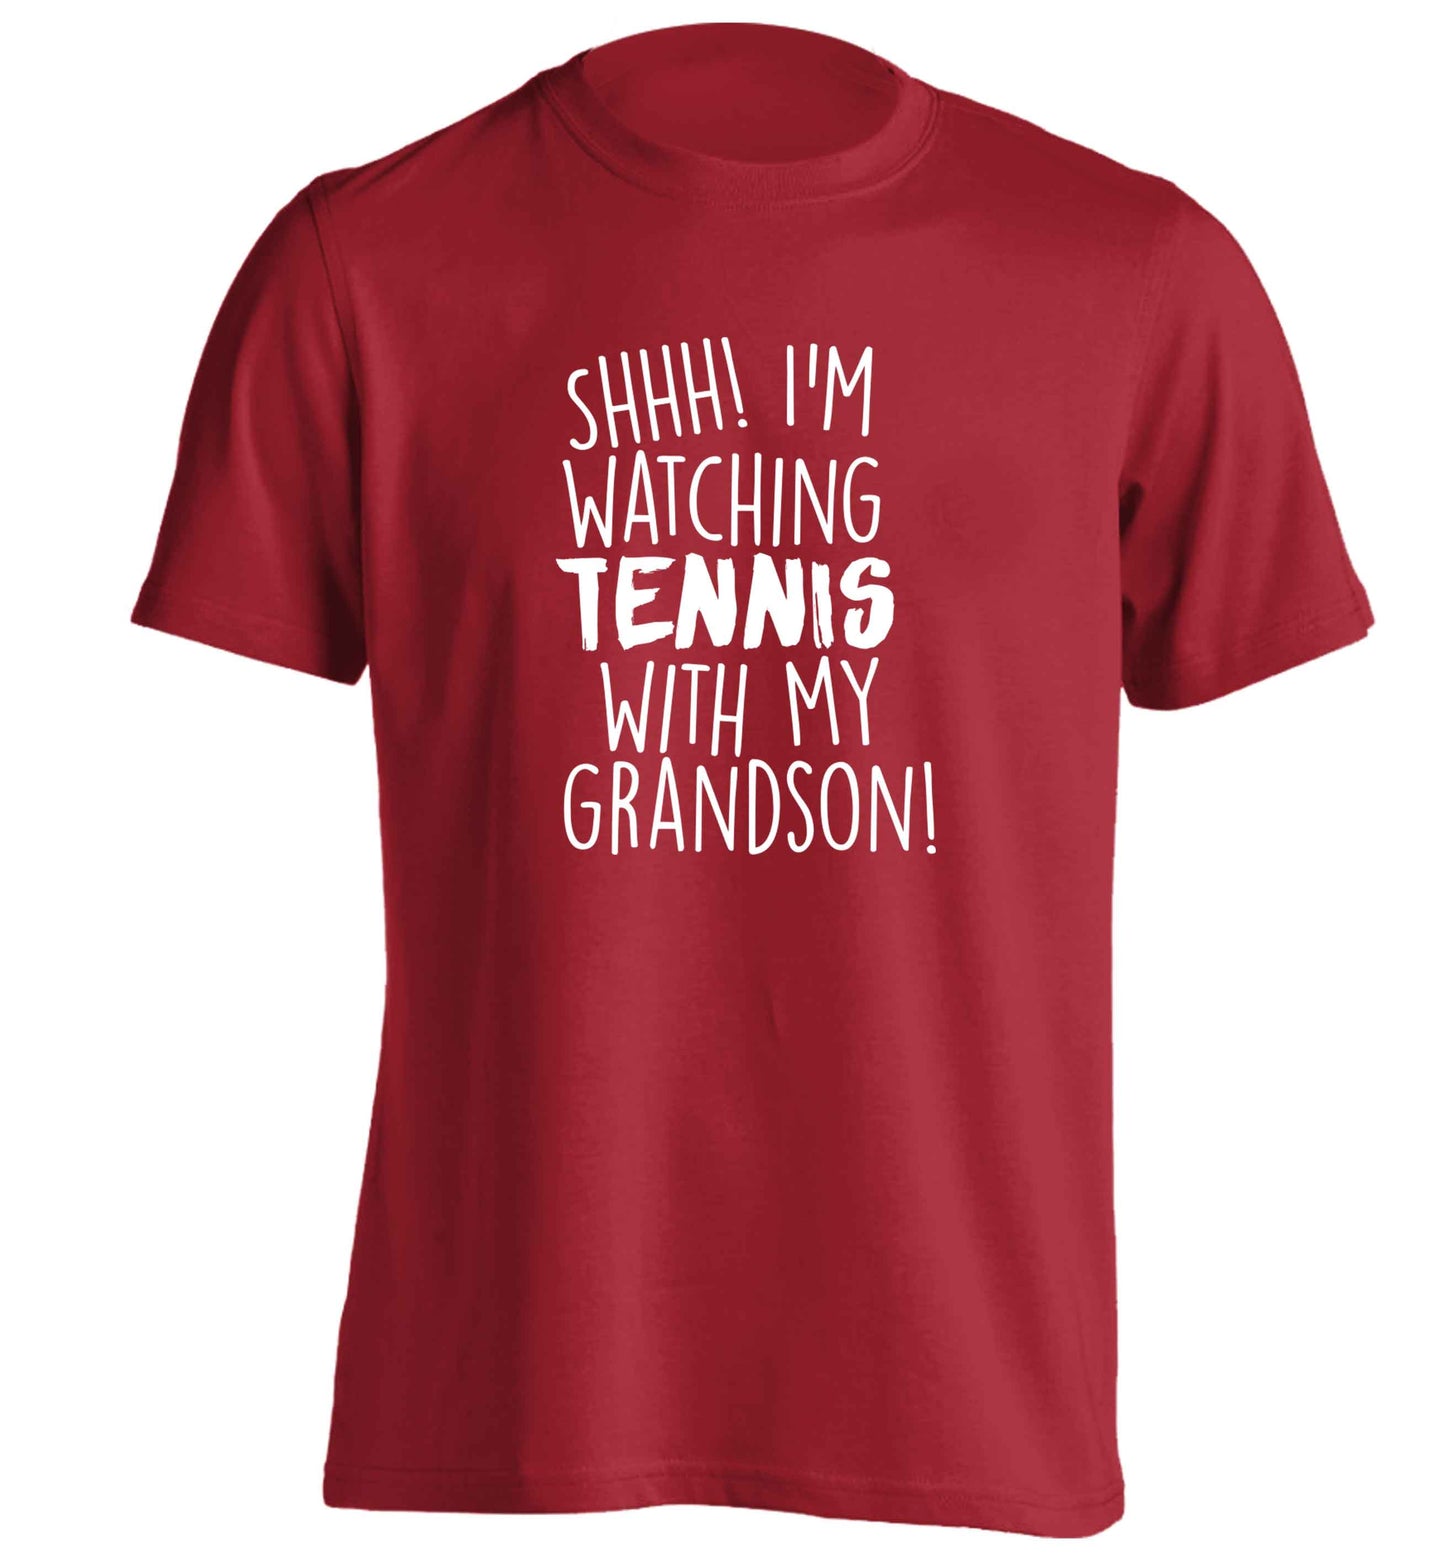 Shh! I'm watching tennis with my grandson! adults unisex red Tshirt 2XL